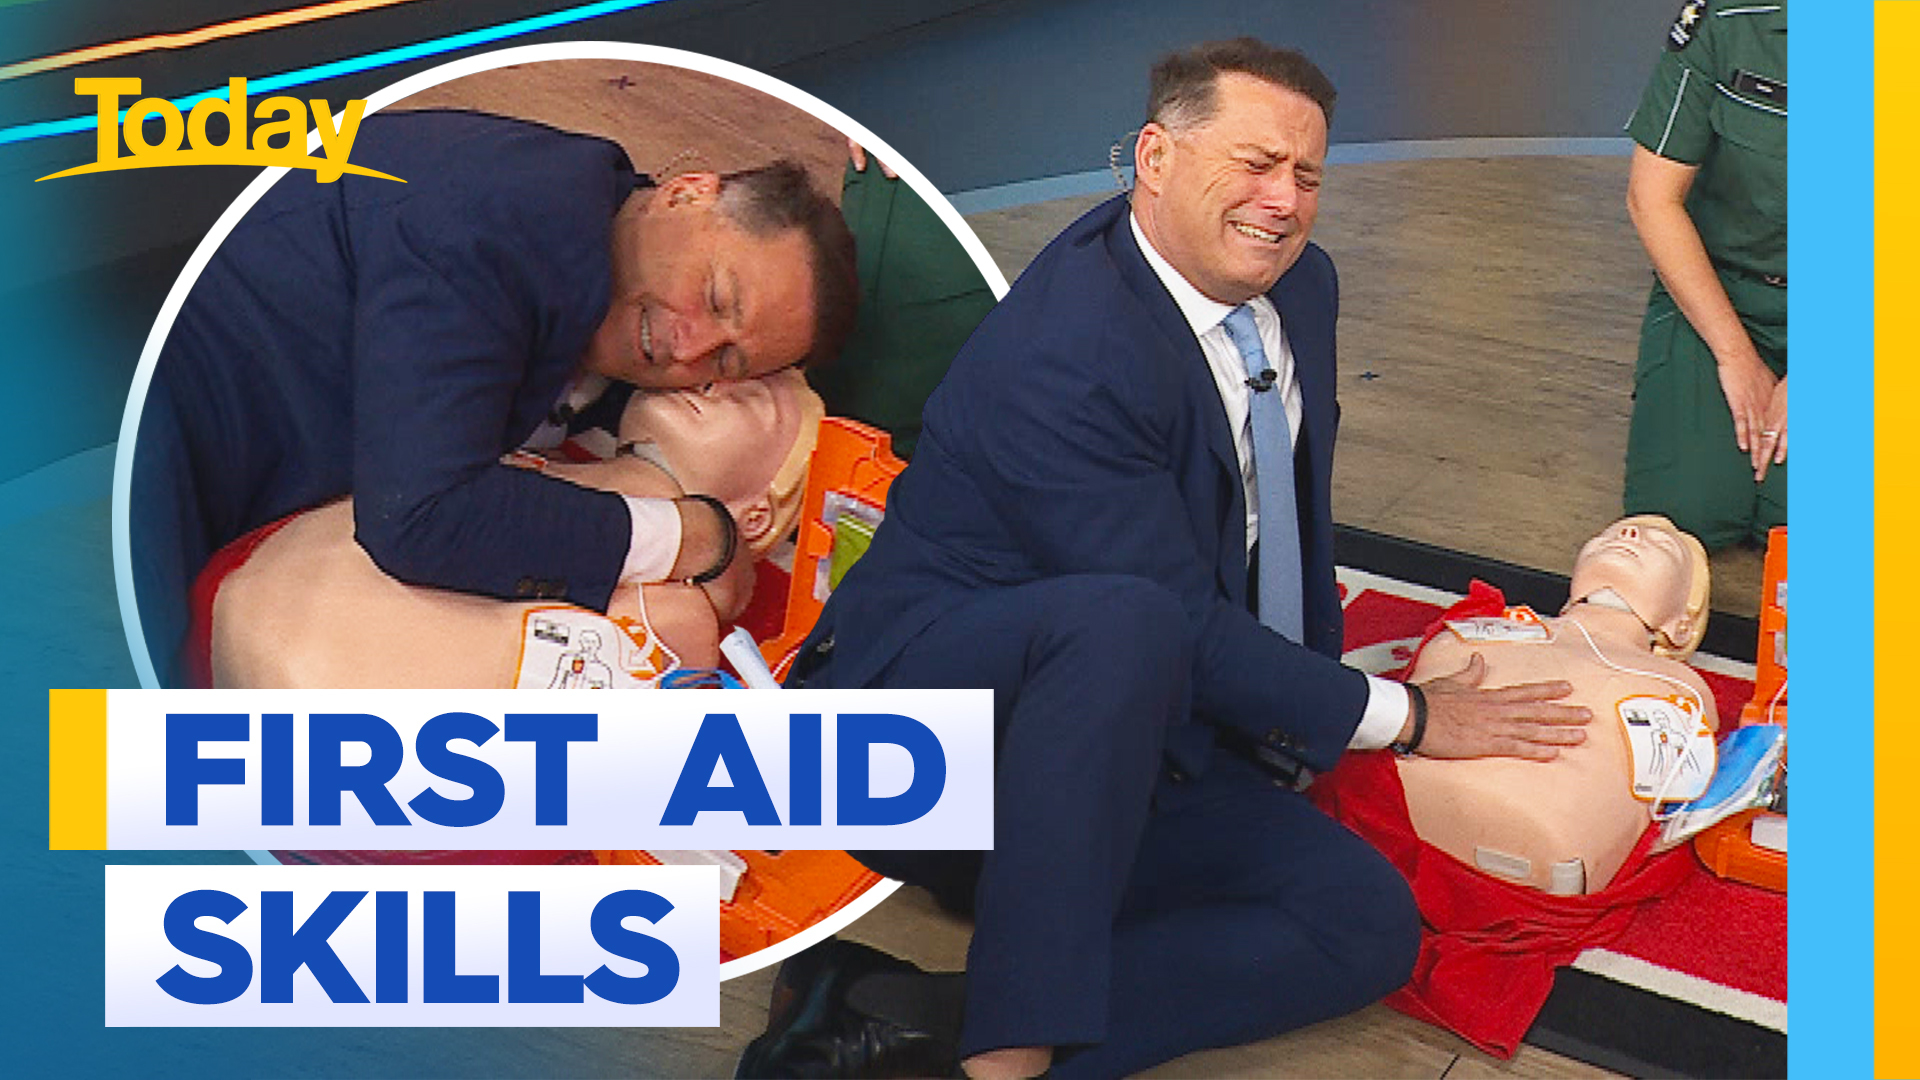 Karl and Sarah brush up on their first aid skills